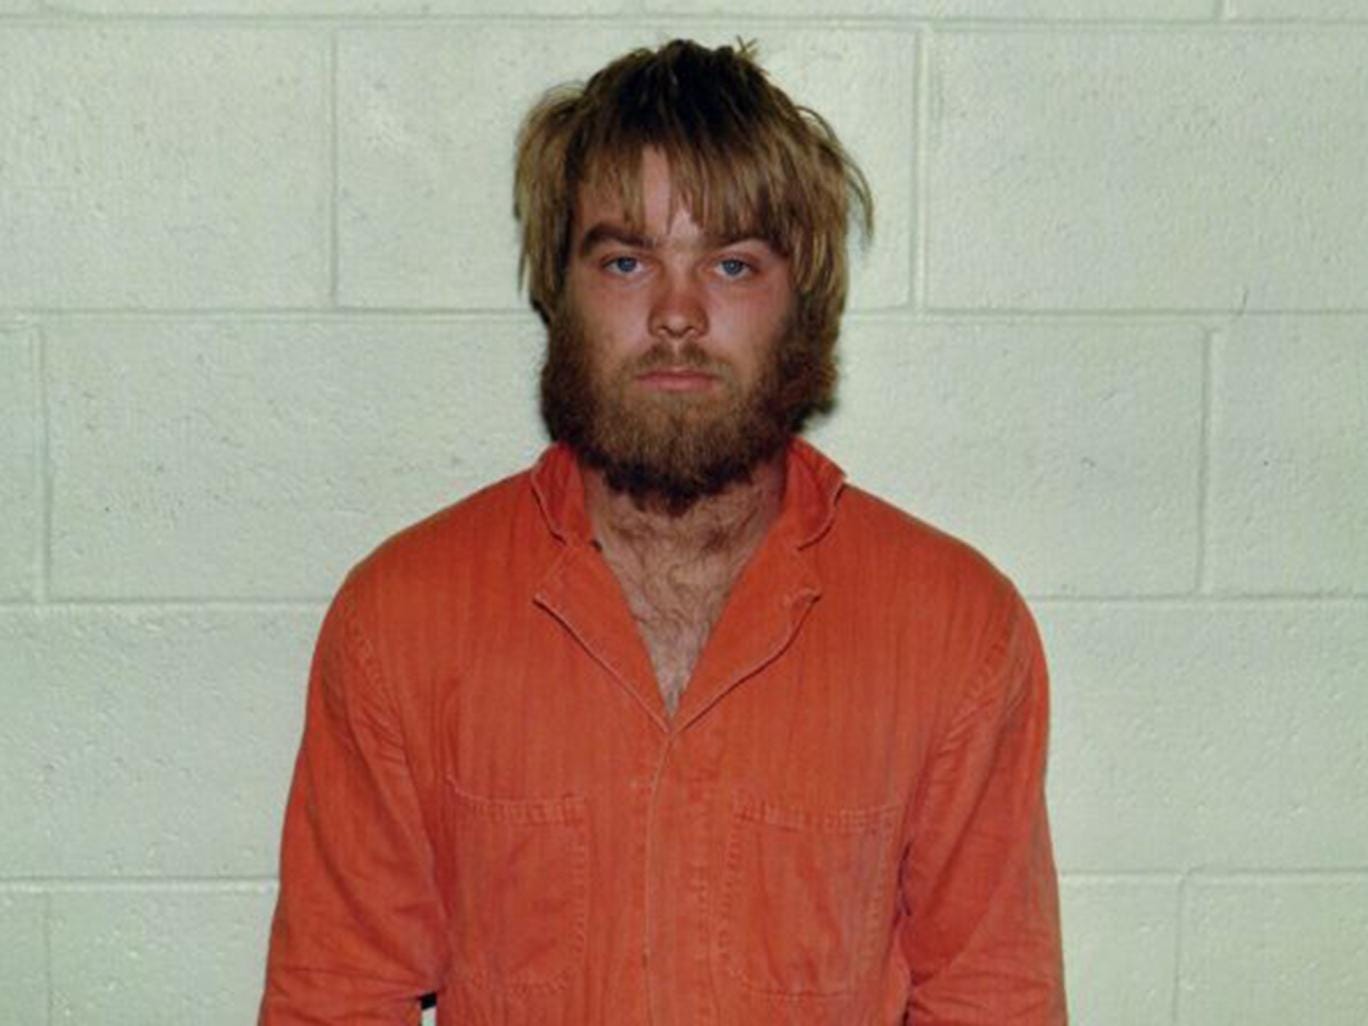 Making A Murderer Season 2 Directors Have Interviewed Steven Avery For Future Episodes News 